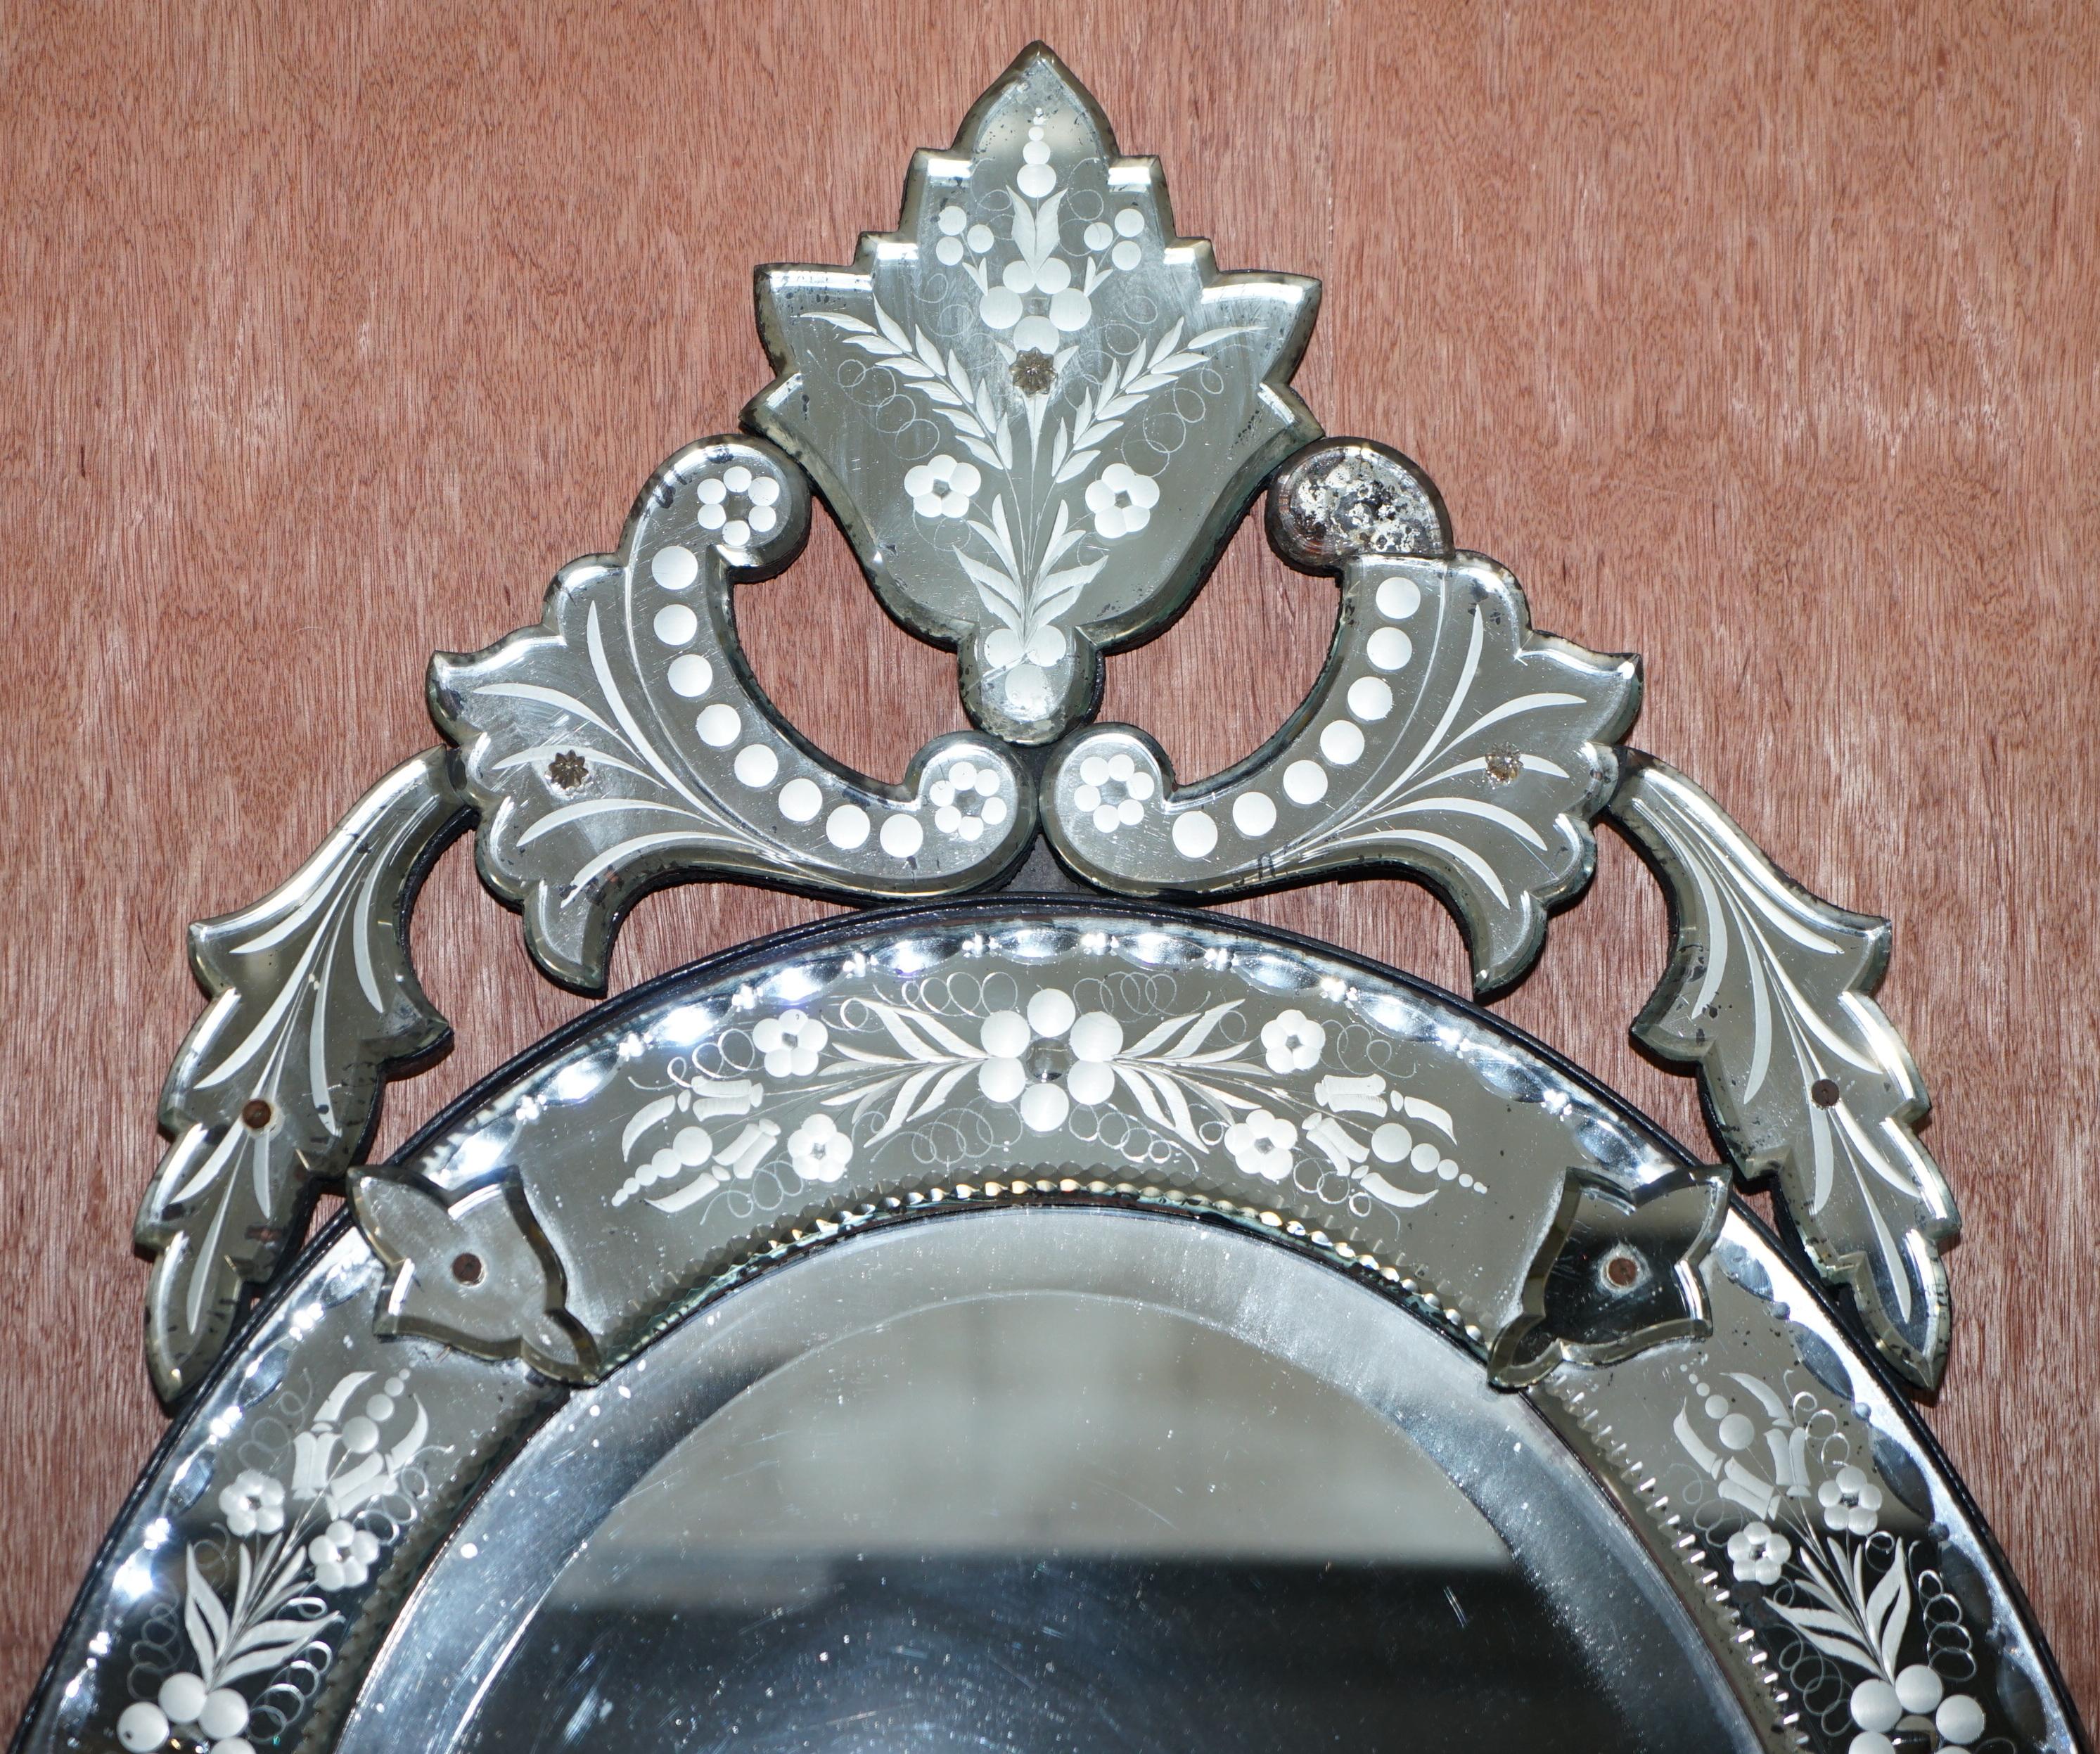 We are delighted to offer for sale this stunning original circa 1890s Venetian etched mirror with bevelled edge frame and wrought iron outer casing 

A very good looking well made and decorative wall mirror, this is a really rather special